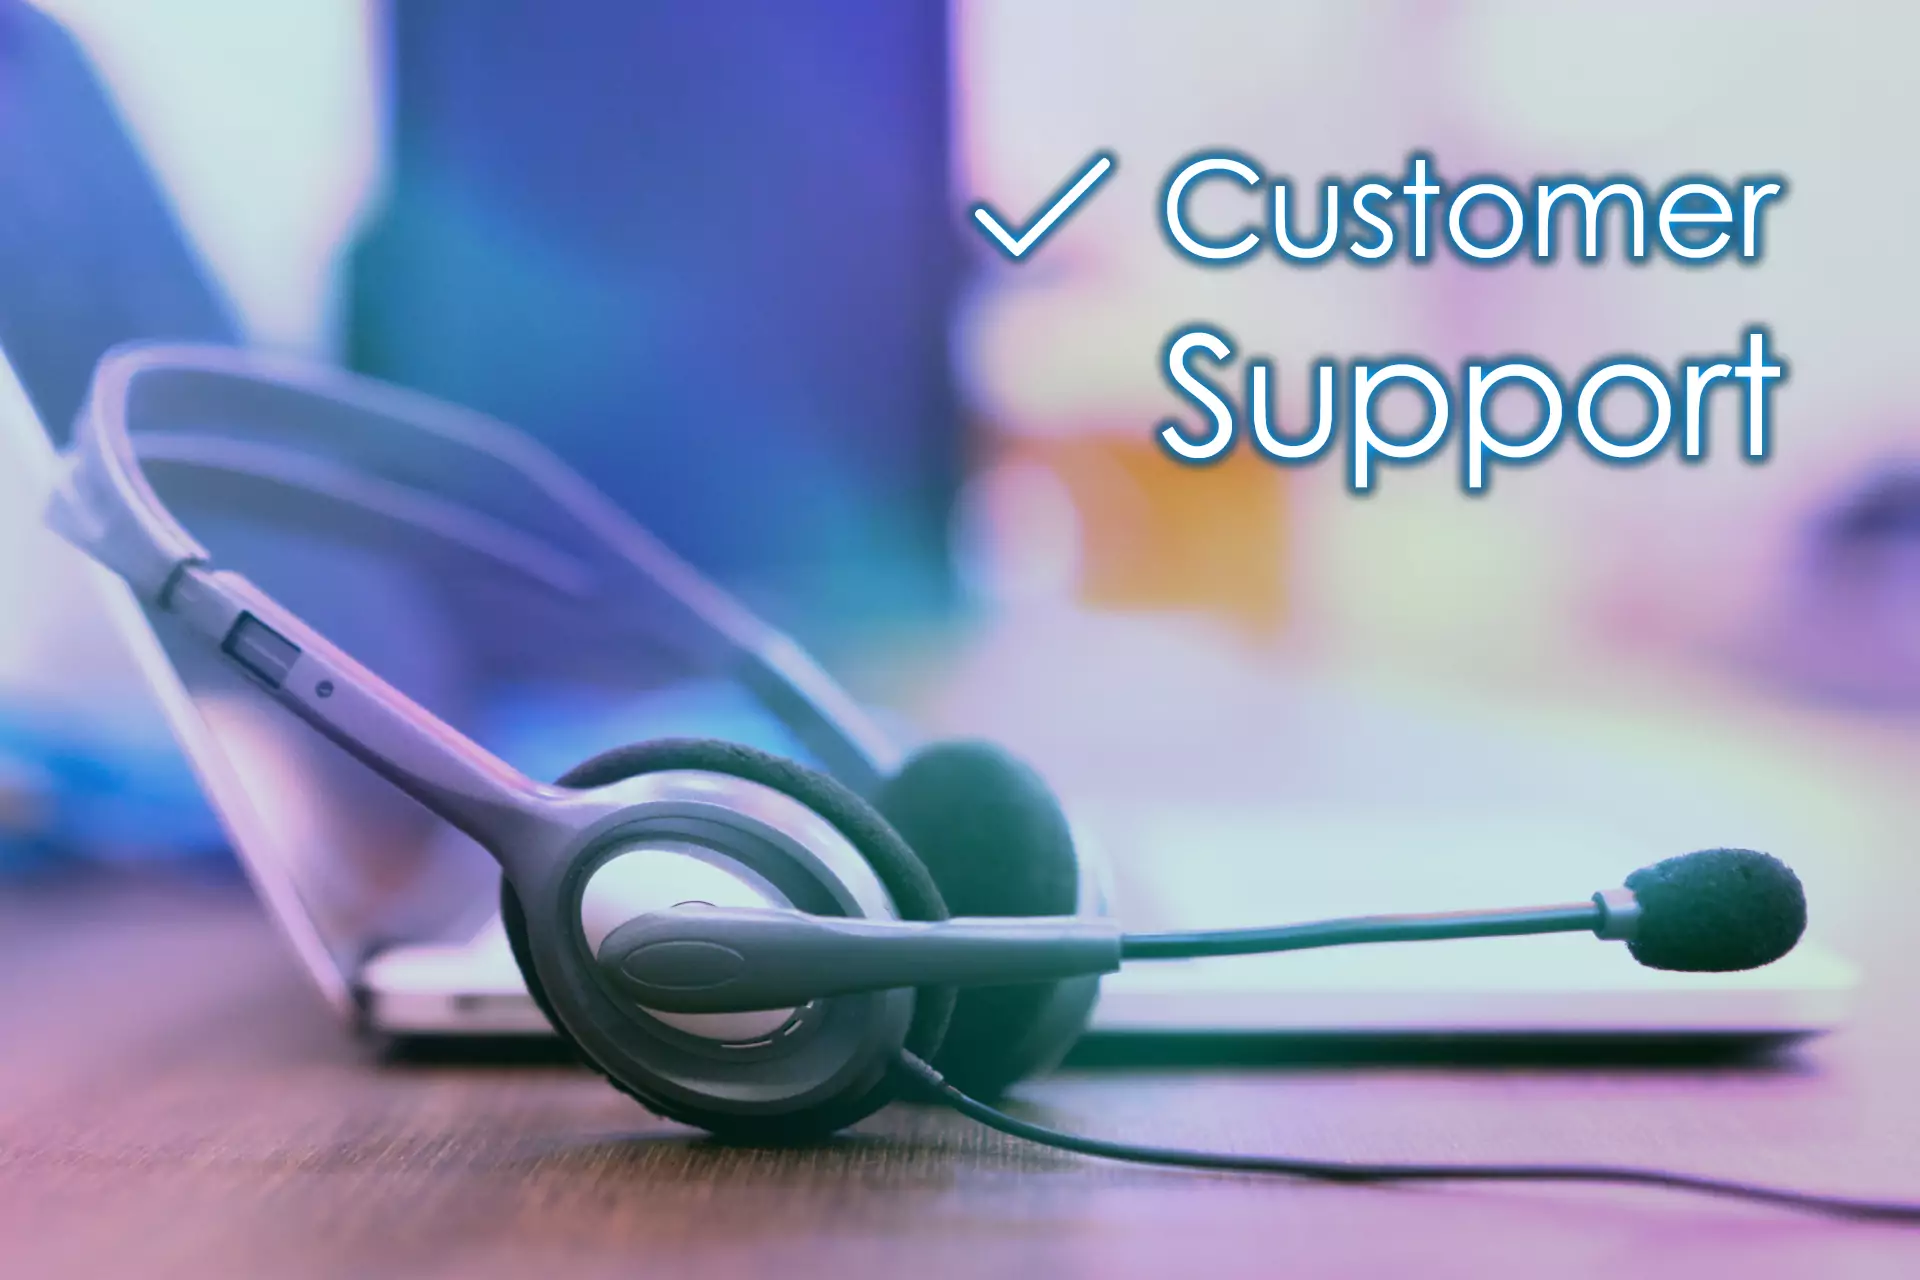 In case you have any problems the customer support must be able to help you to solve them.